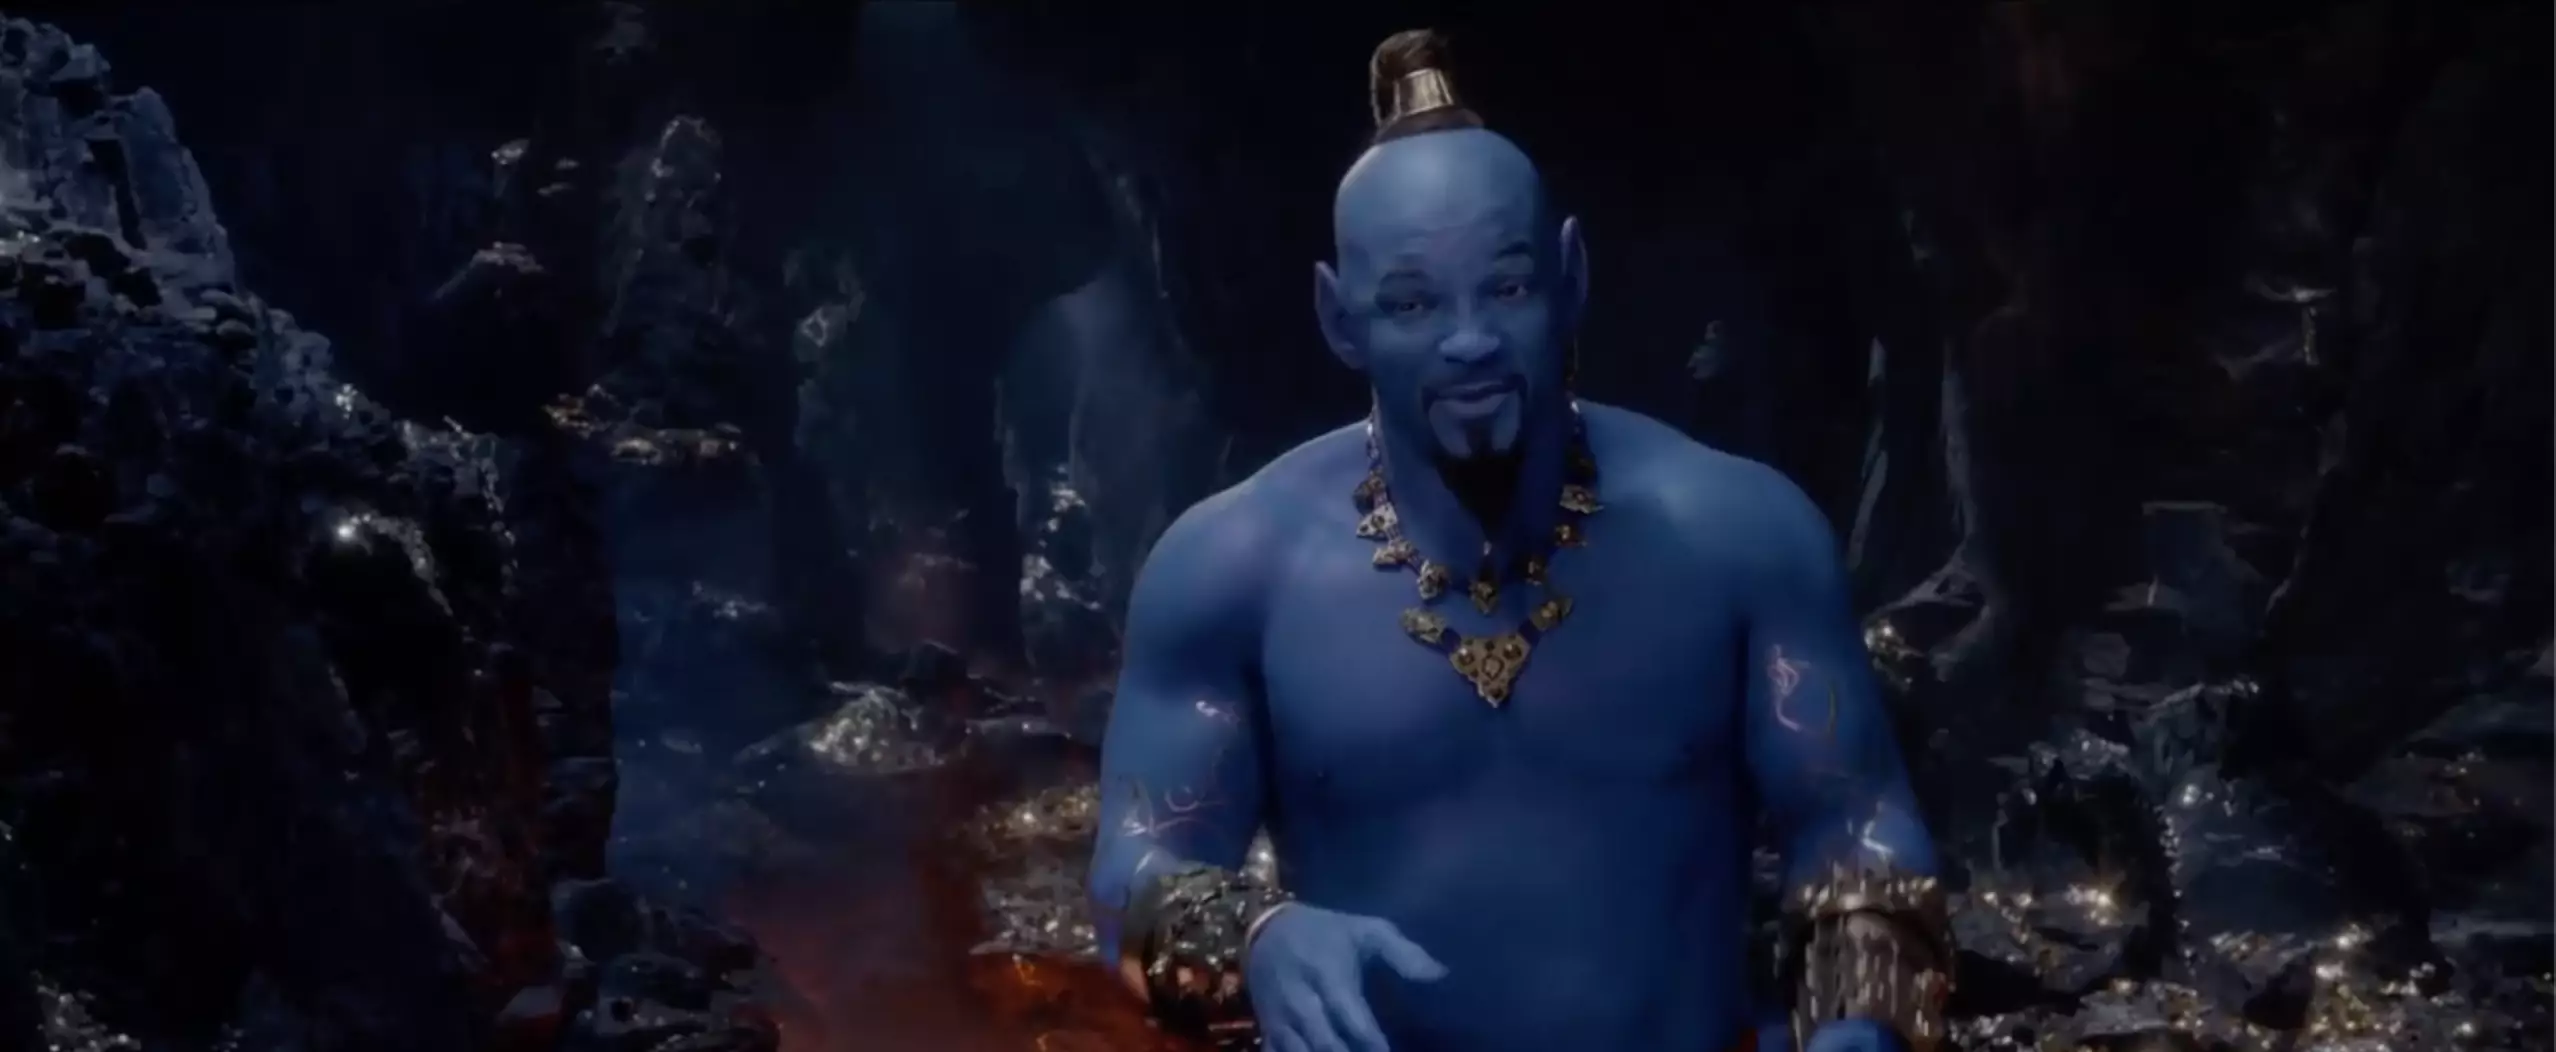 This is Will Smith's Genie.